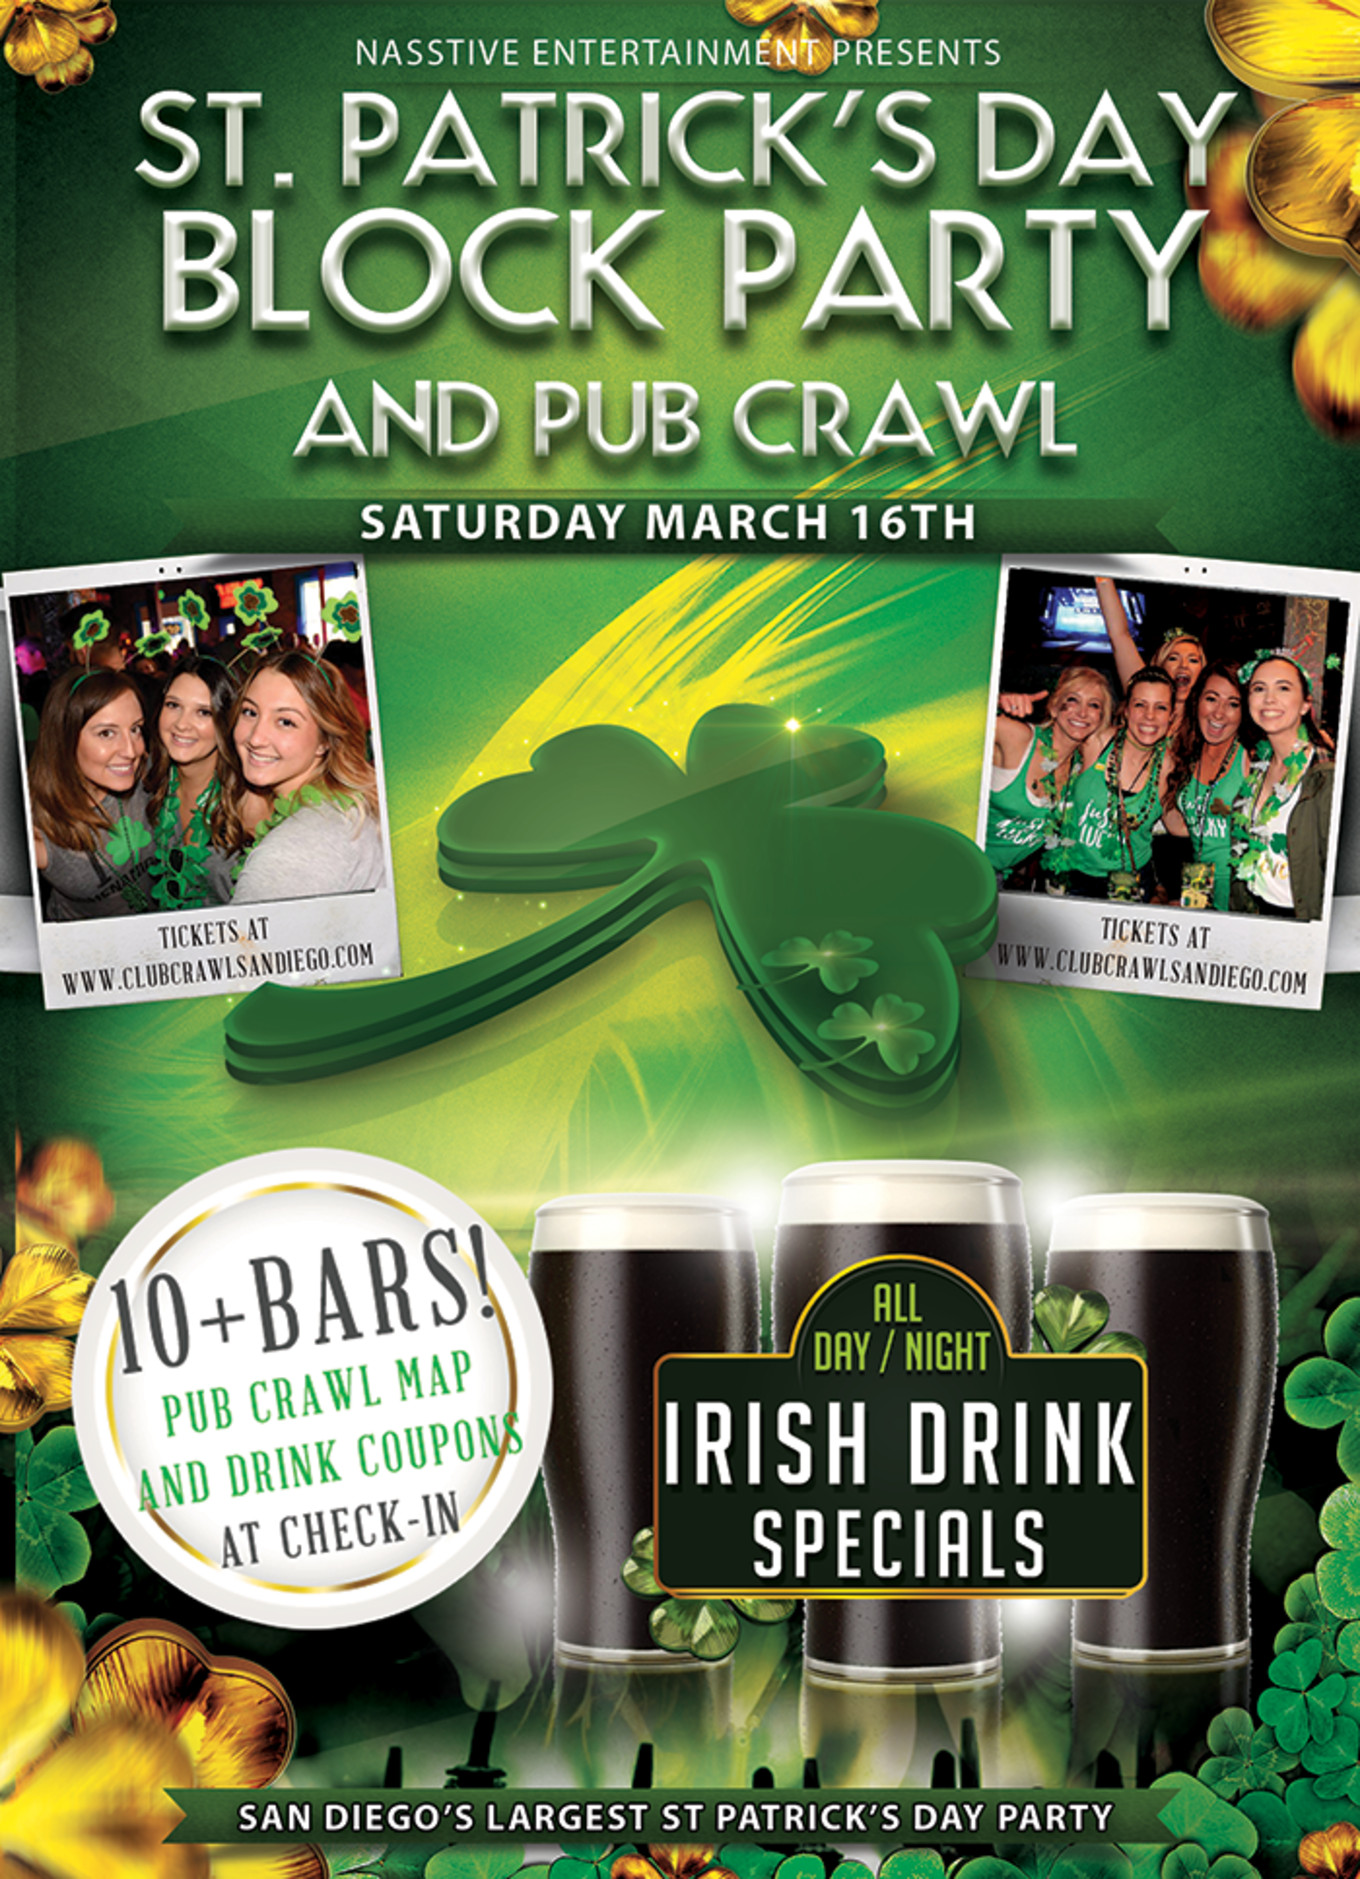 St Patrick's Day Block Party
 SAN DIEGO ST PATRICK S DAY SATURDAY BLOCK PARTY & PUB